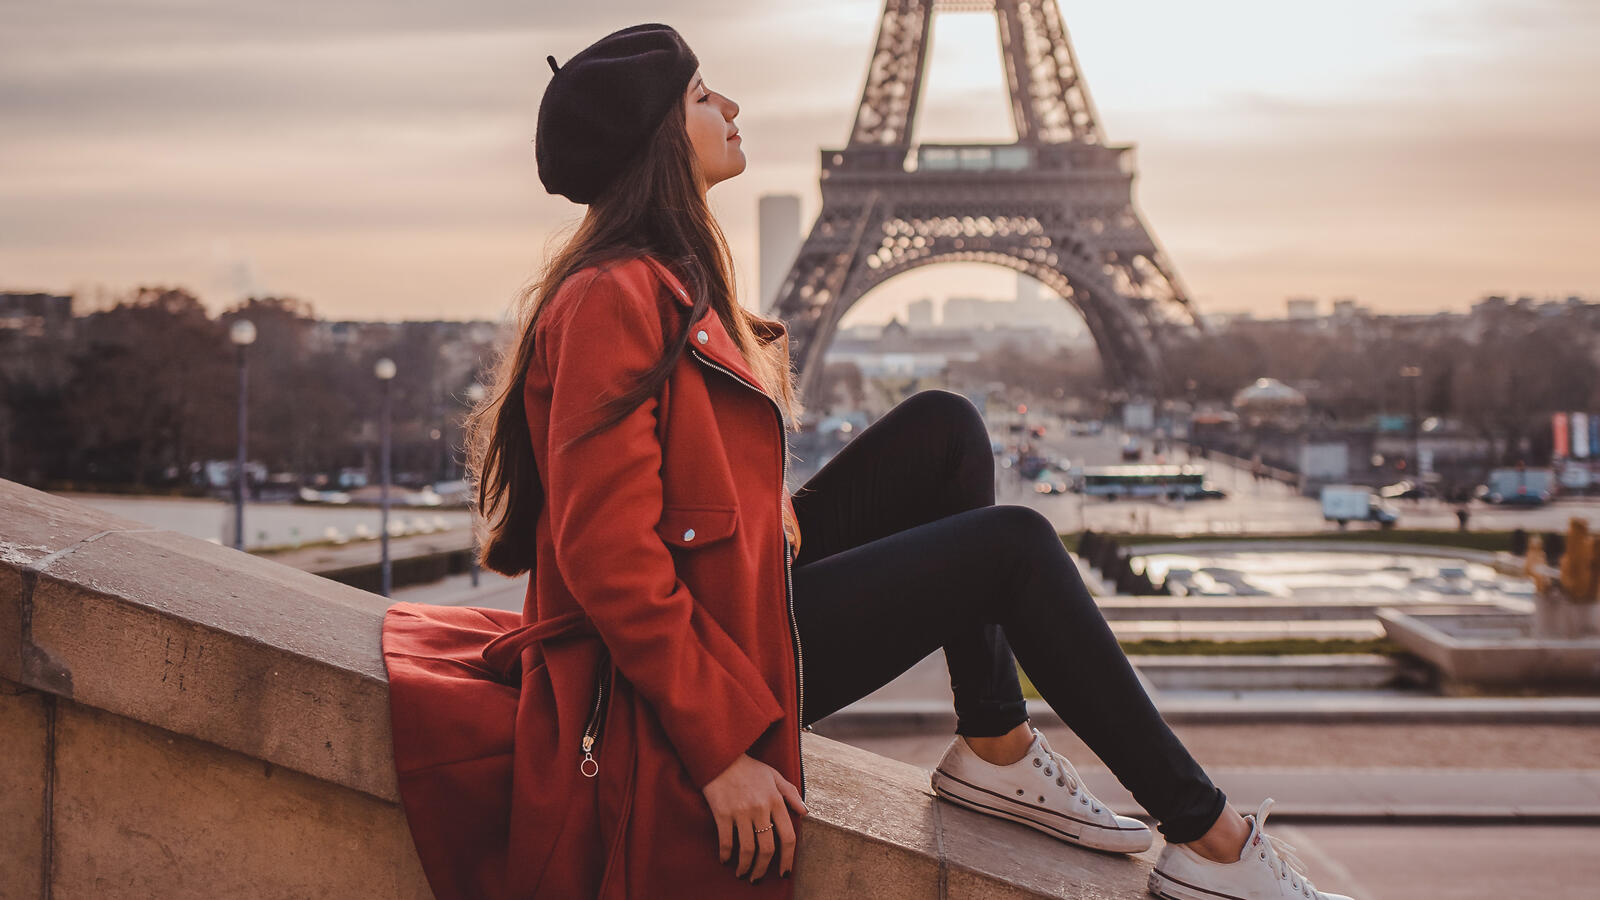 Free photo Girl in a red jacket against the background of the Eiffel Tower